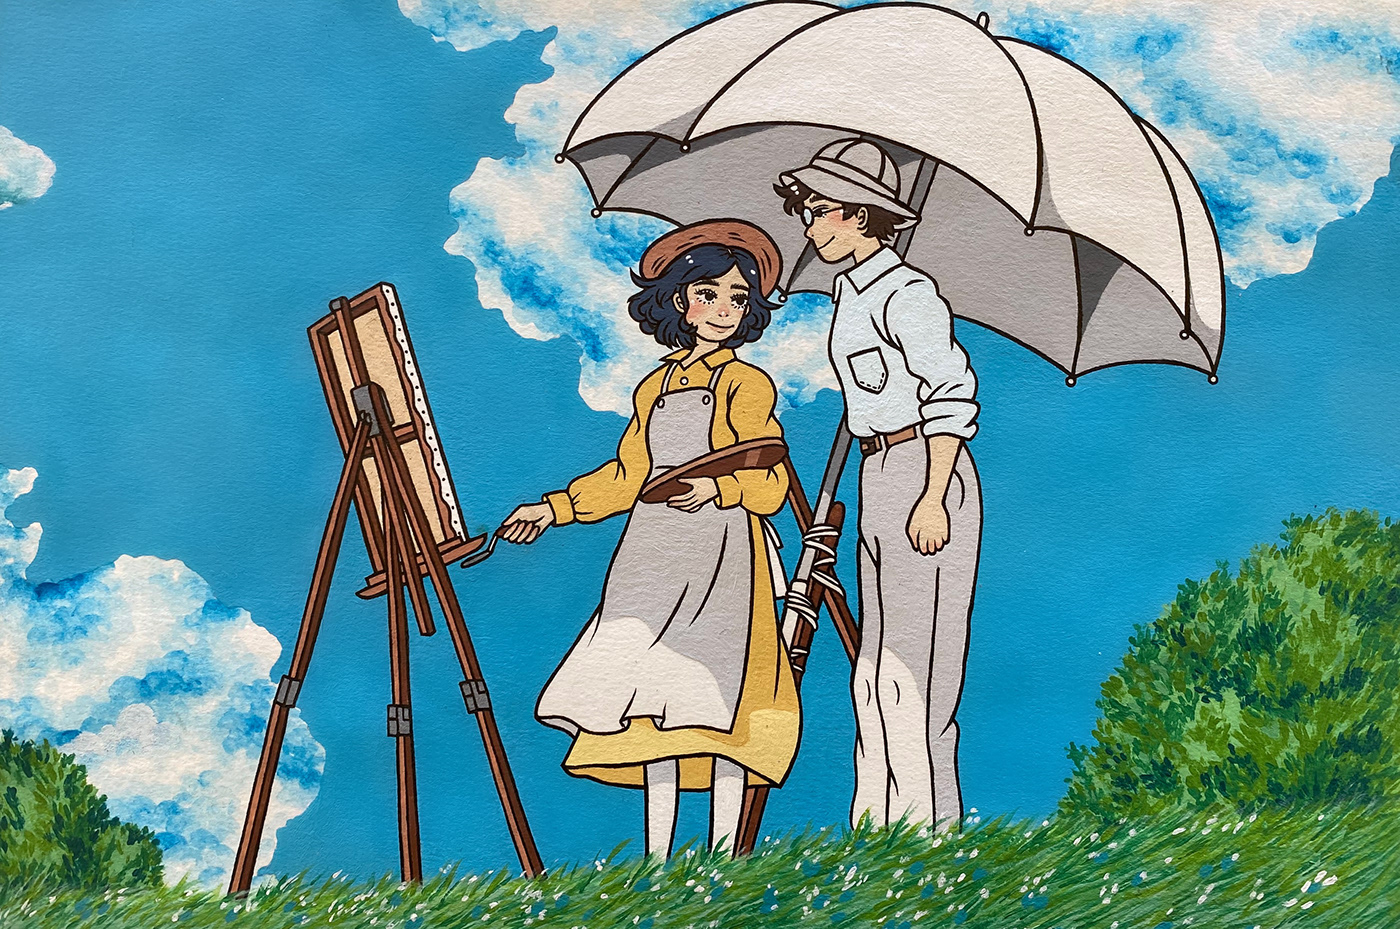 A repaint of a screencap from the Studio Ghibli movie, The Wind Rises.